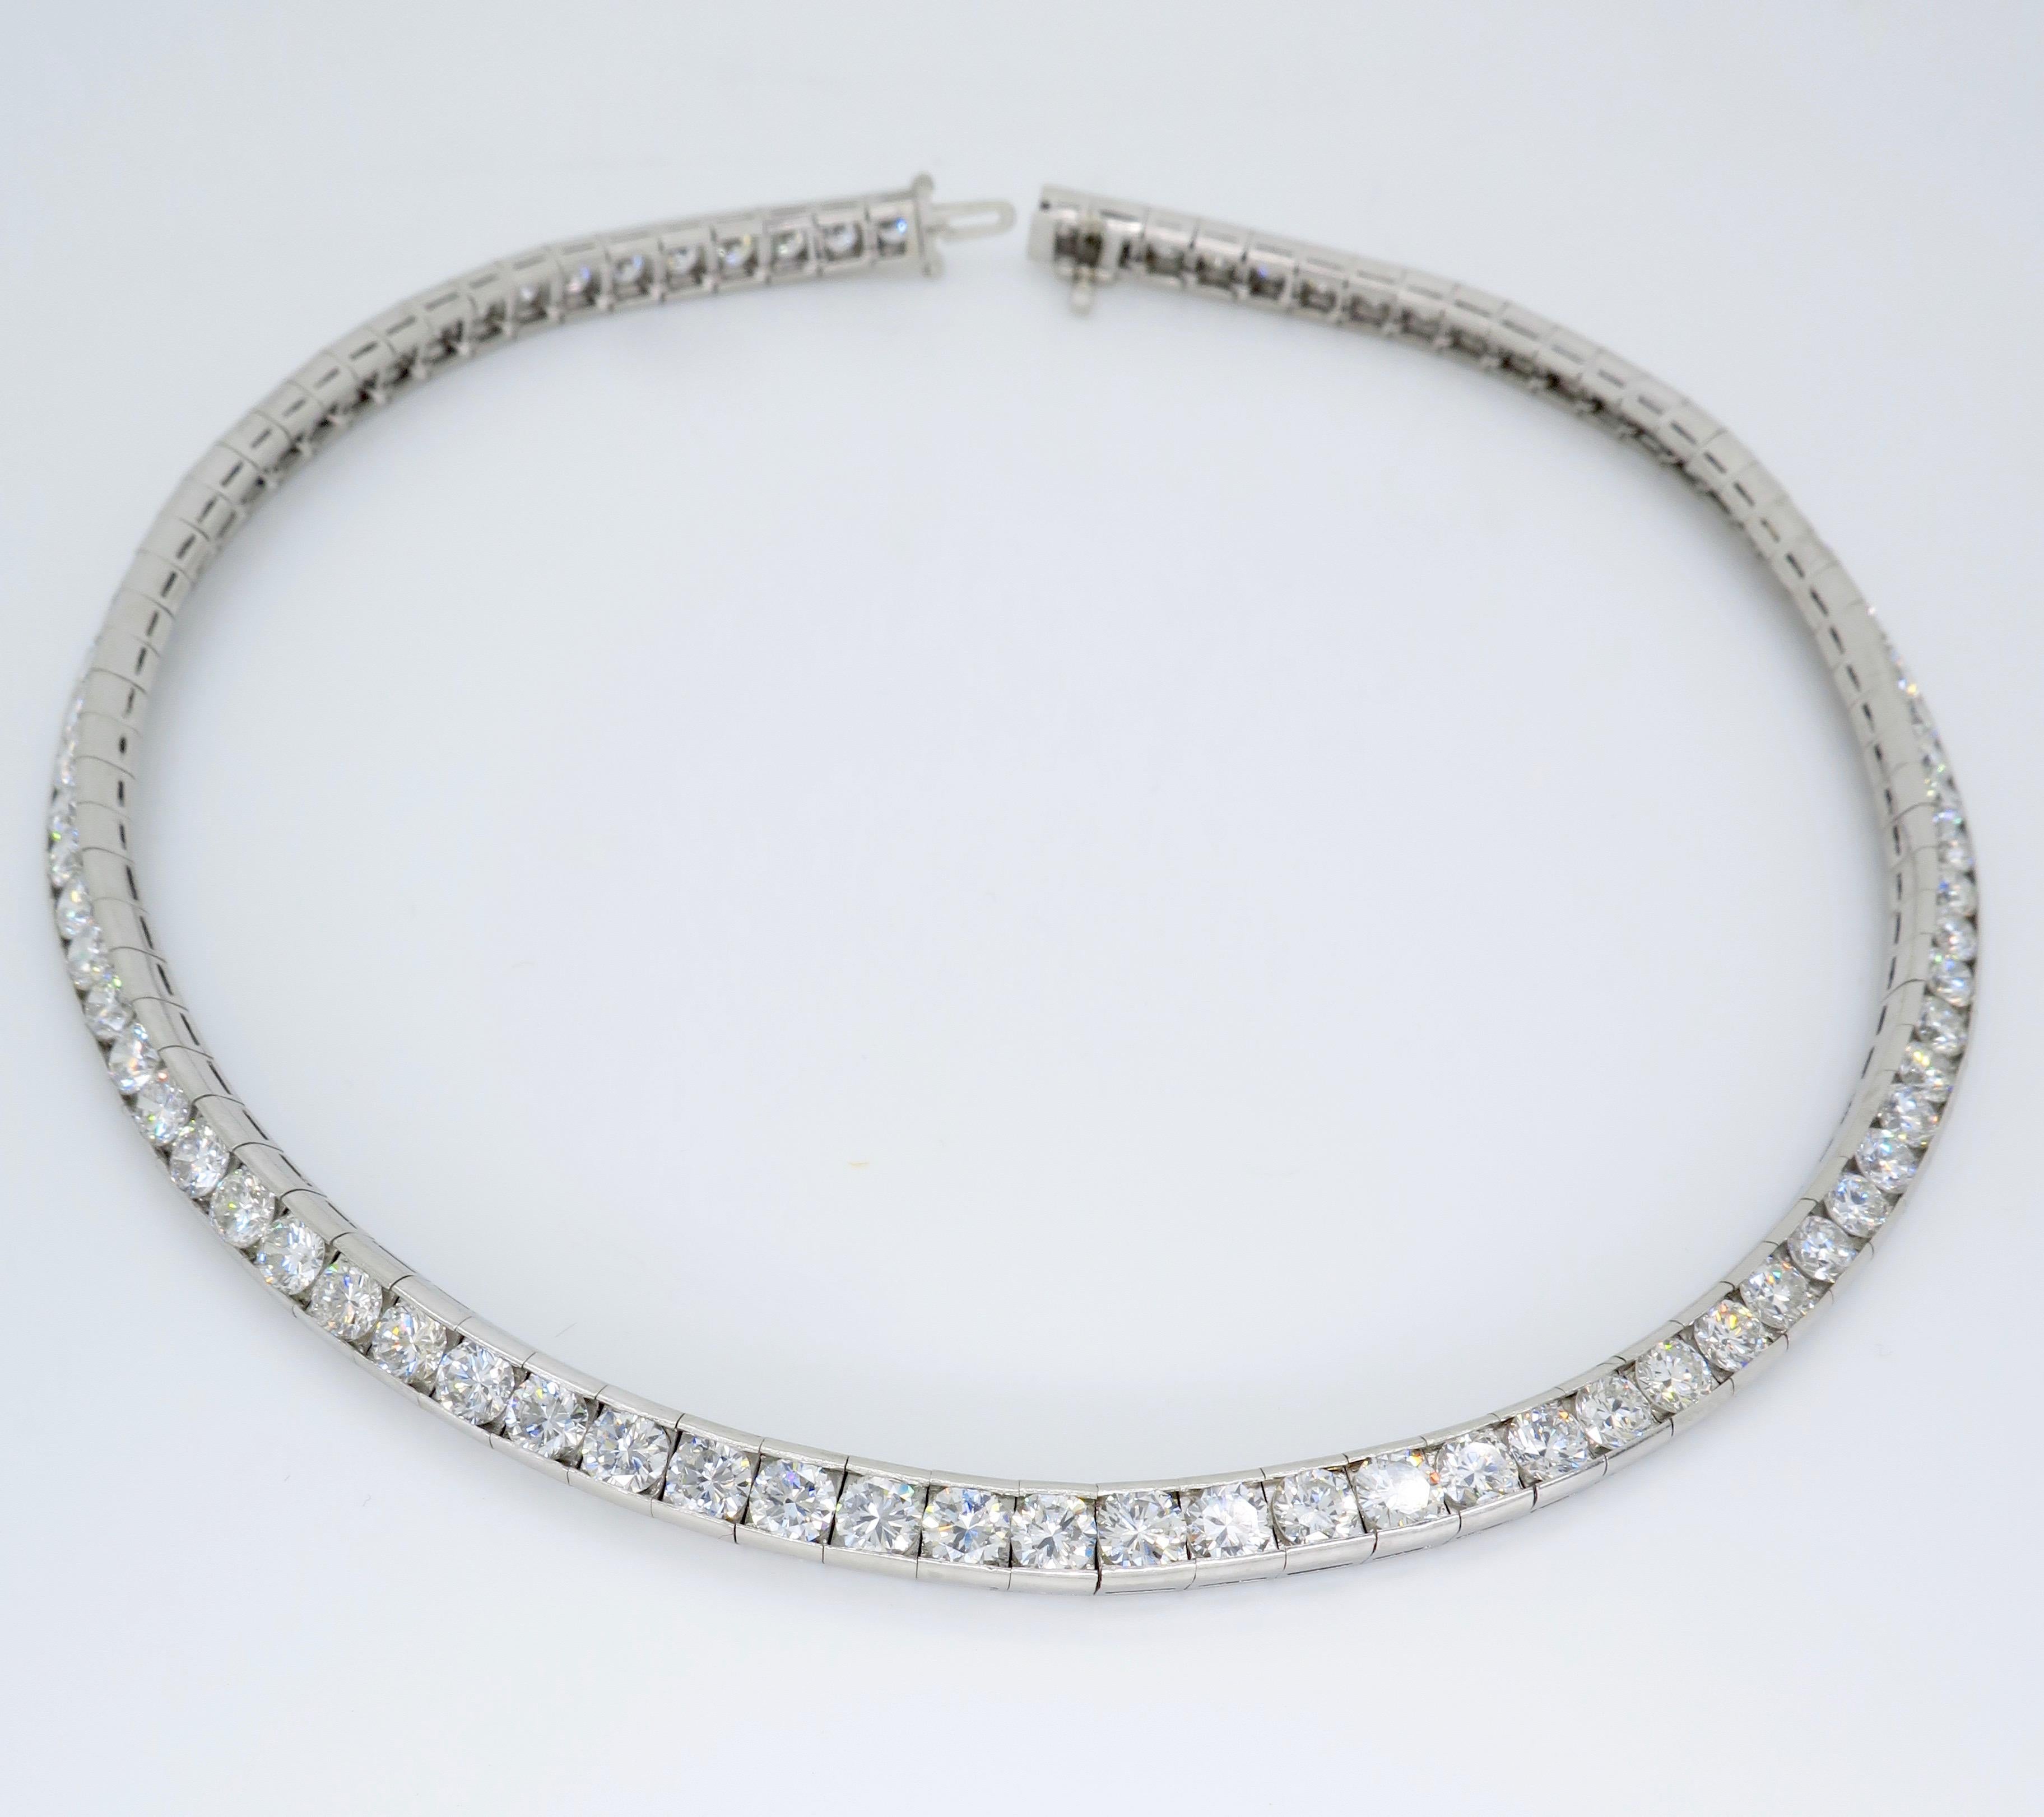 Absolutely stunning platinum choker featuring approximately 25ctw of Round Brilliant Cut Diamonds.

Total Diamond Carat Weight:  Approximately 25.00CTW
Diamond Cut: 87 Round Brilliant Cut 
Color: Average F-H
Clarity: Average VS1-VS2
Metal: